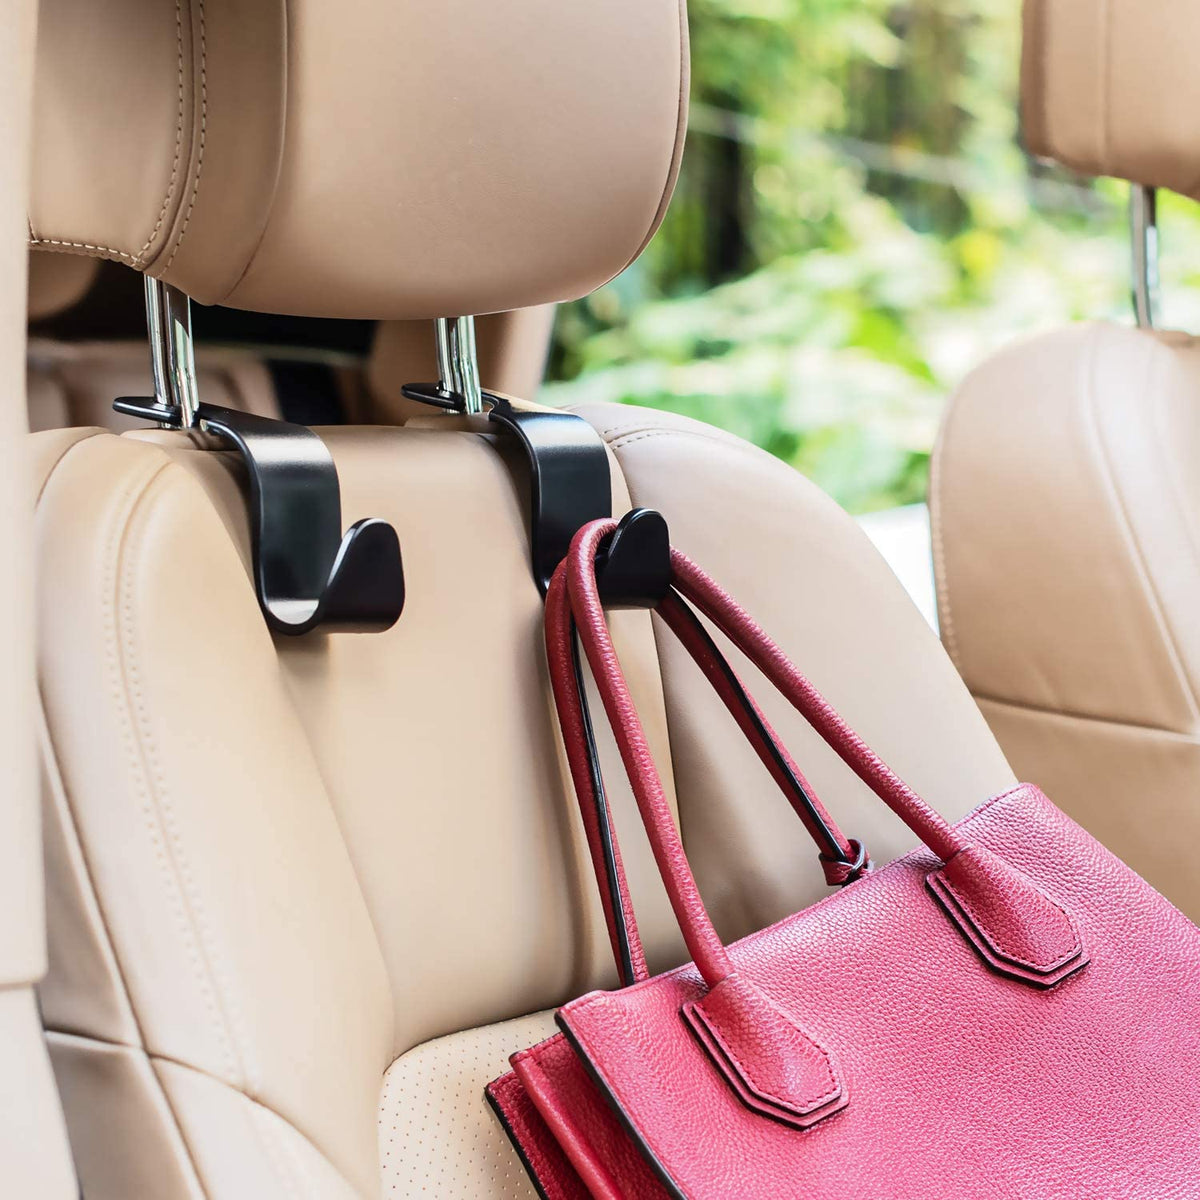 These headrest hooks keep my car organized and clutter free